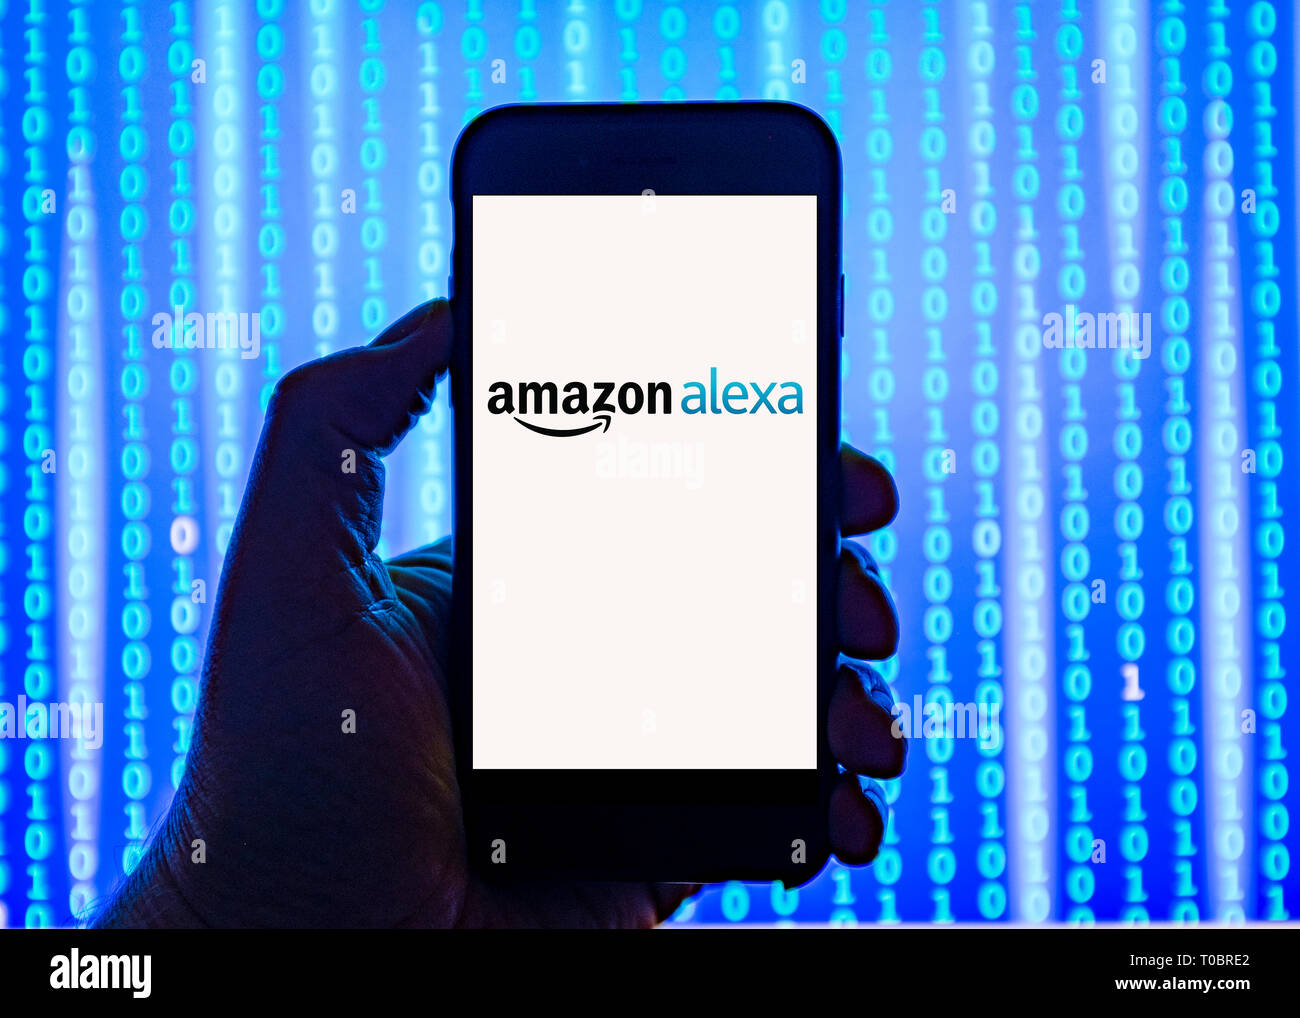 Person holding smart phone with Amazon Alexa virtual assistant  logo displayed on the screen. Stock Photo